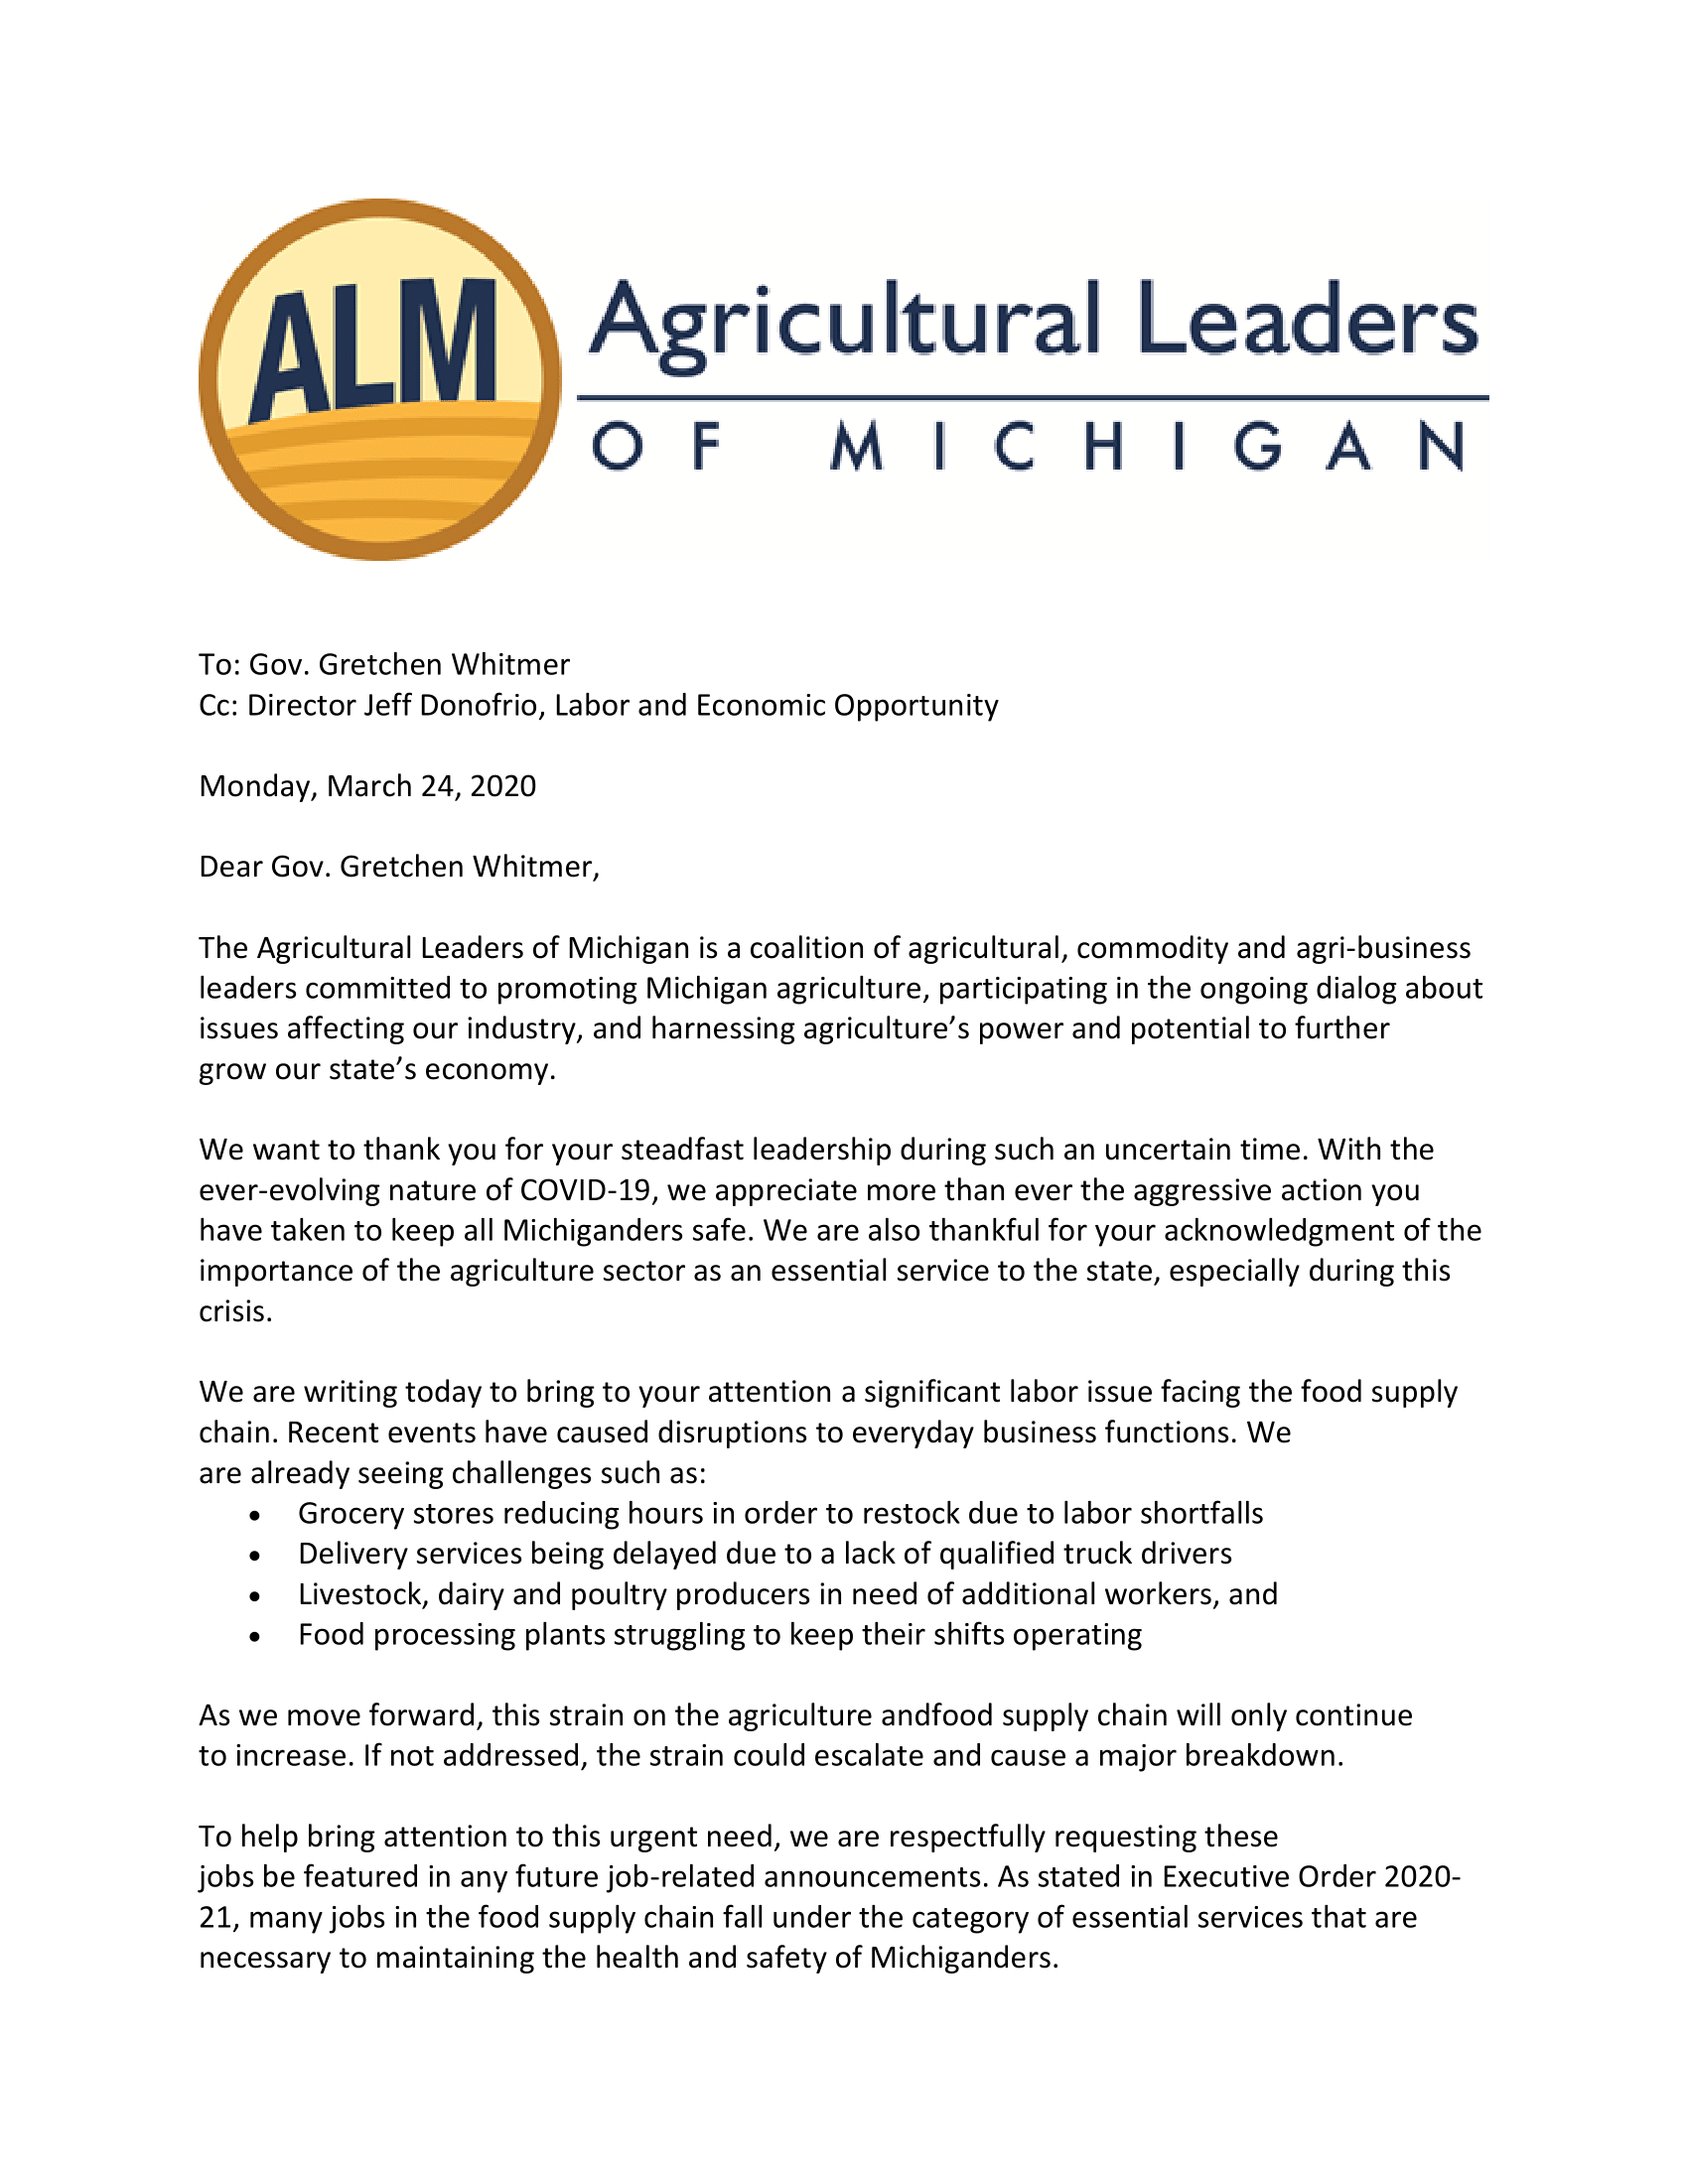 ALM food supply chain letter-1.png